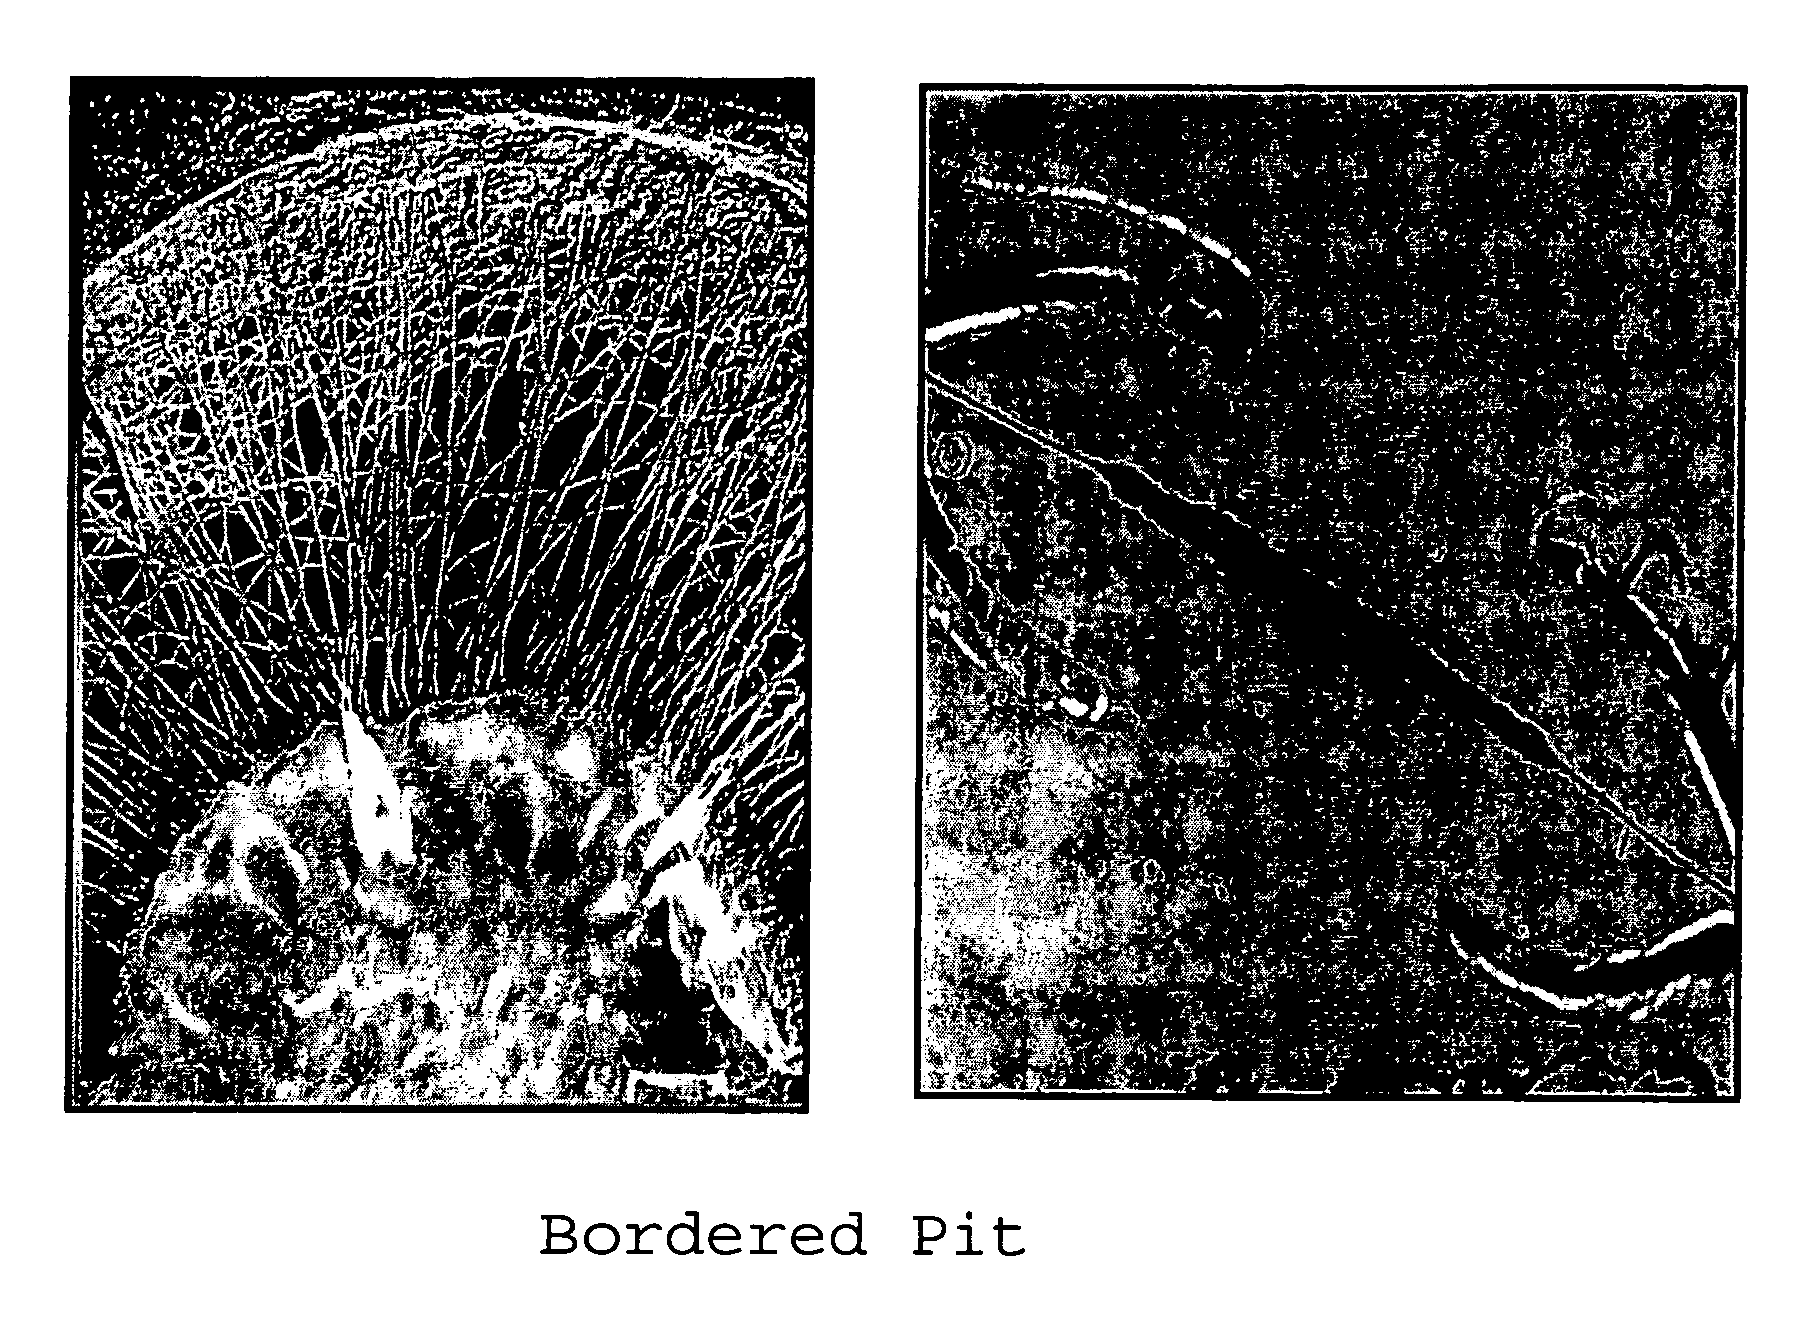 Wood preservative compositions comprising isothiazolone-pyrethroids